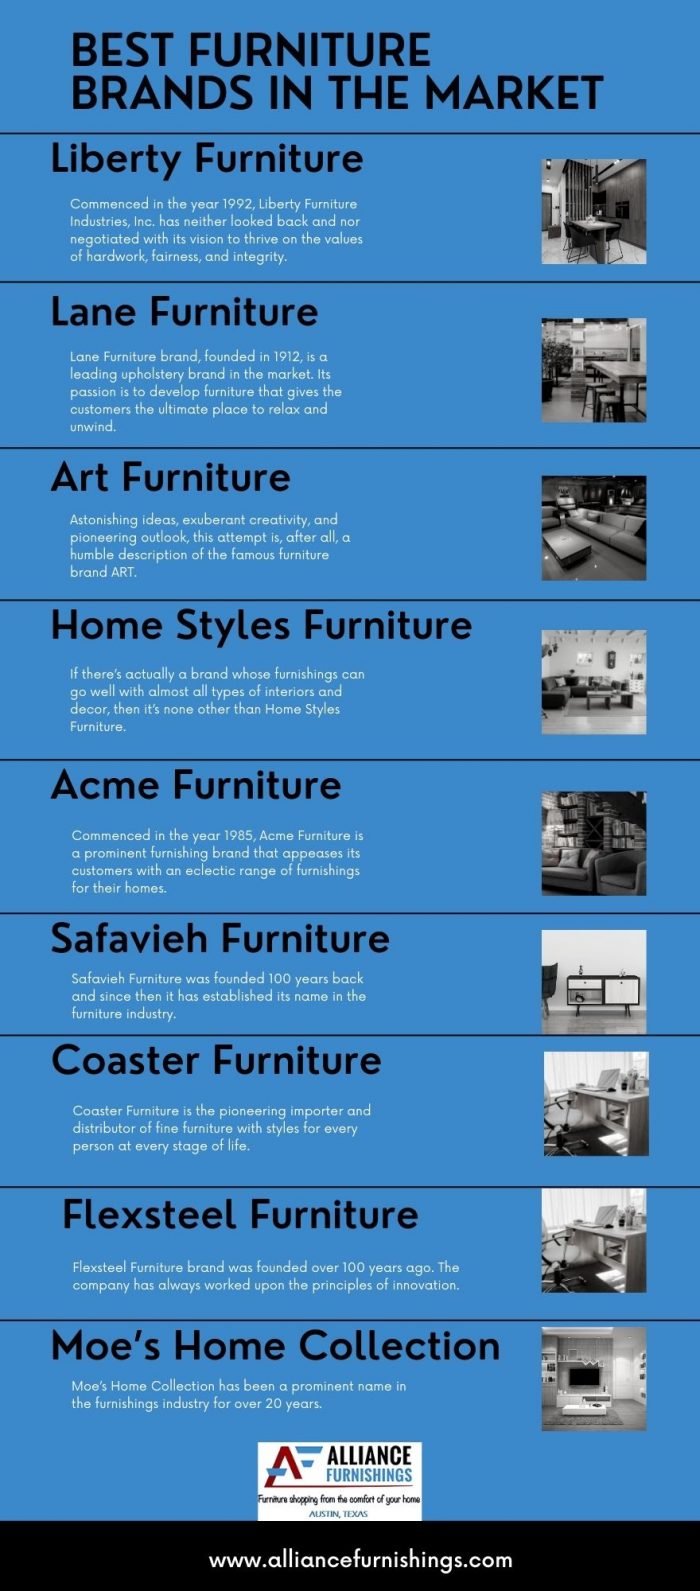 BEST FURNITURE BRANDS TO CONSIDER FOR HOME AND OFFICE FURNITURE